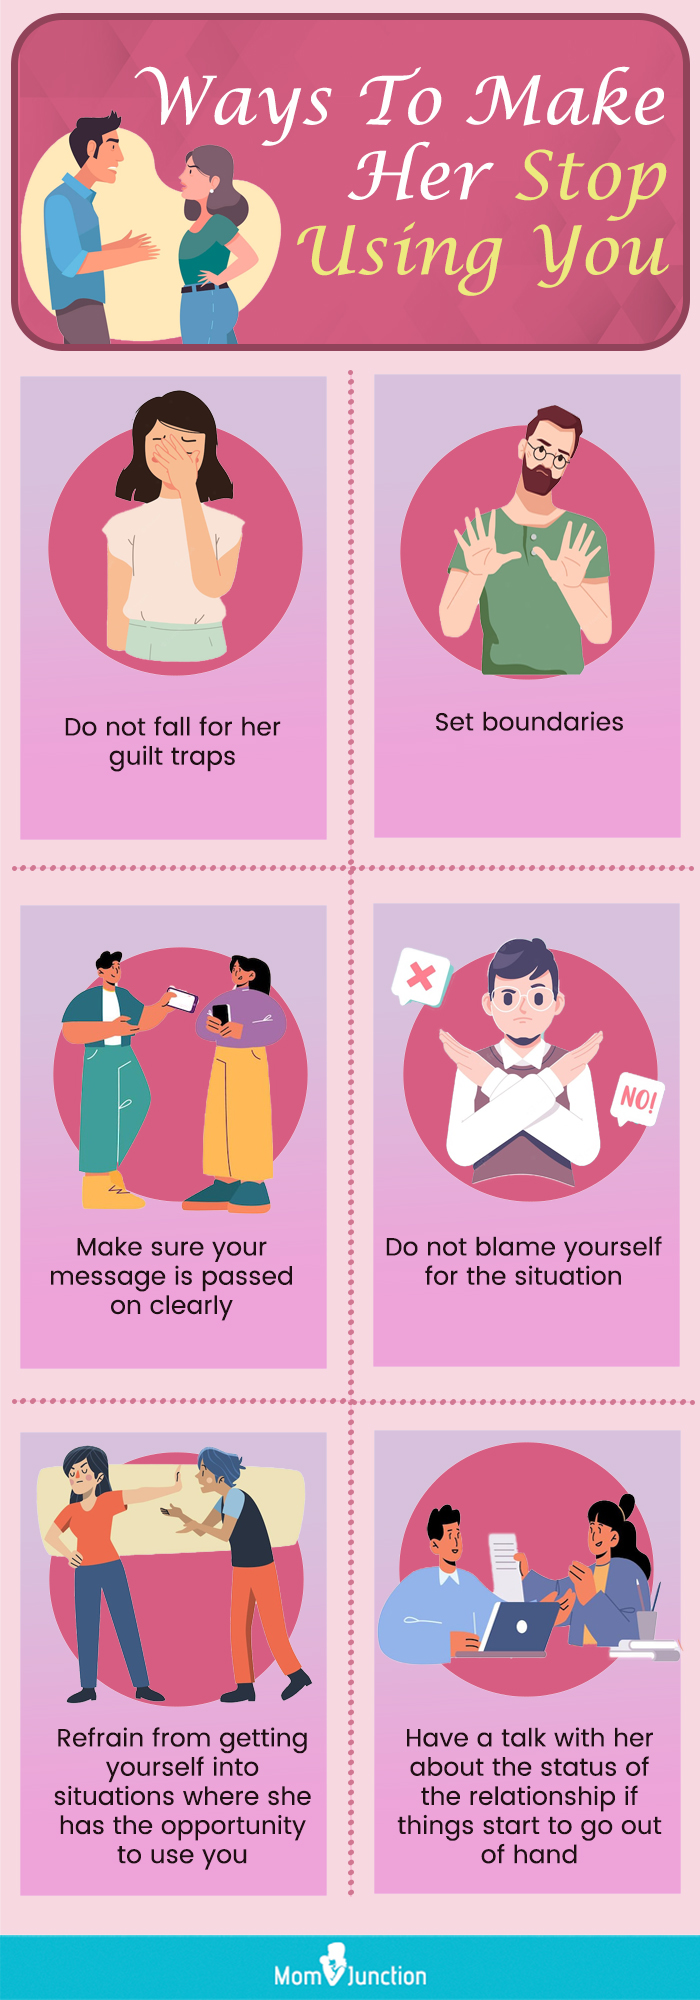 ways to make her stop using you (infographic)